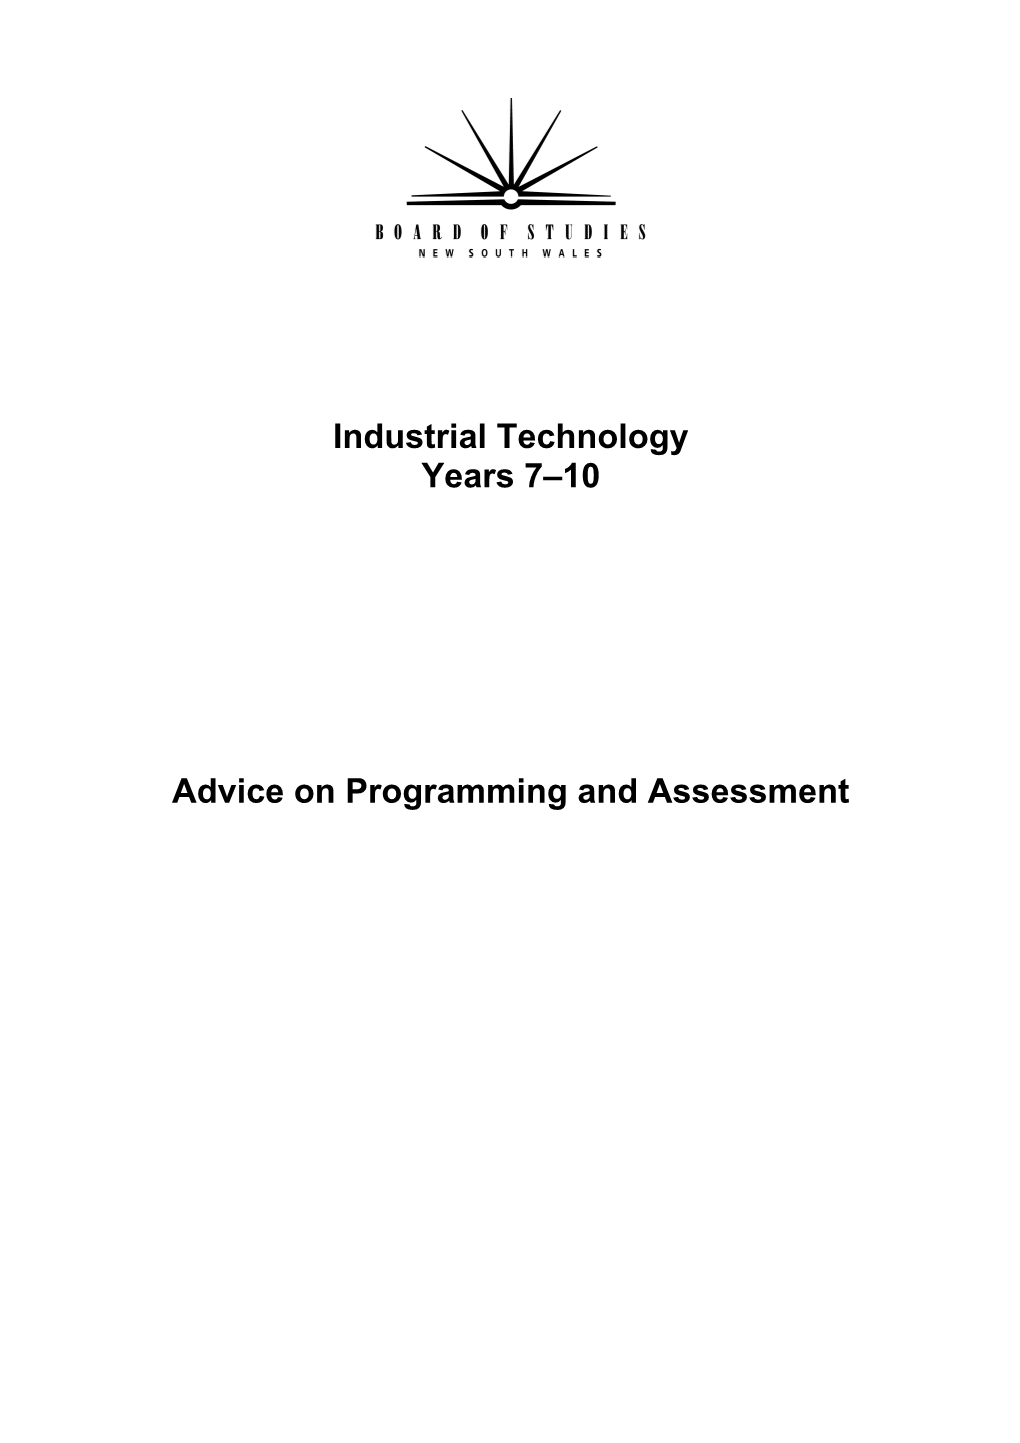 Advice on Programming and Assessment